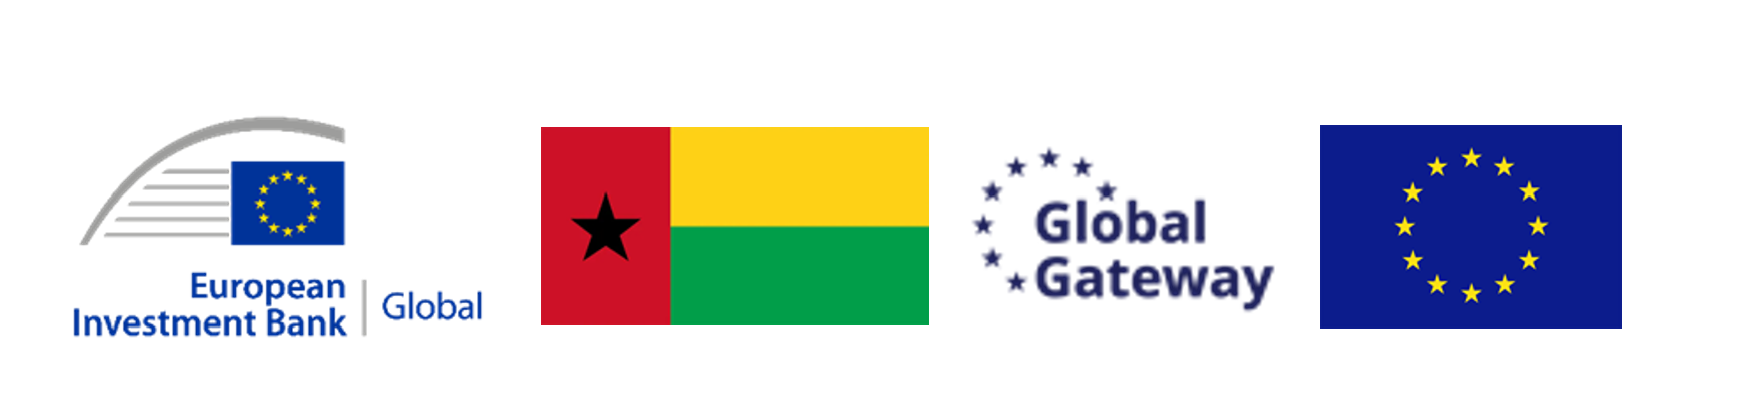 Global Gateway: European Investment Bank (EIB) Global launches technical assistance cooperation agreement for the Guinea-Bissau Resilient Road Corridor project